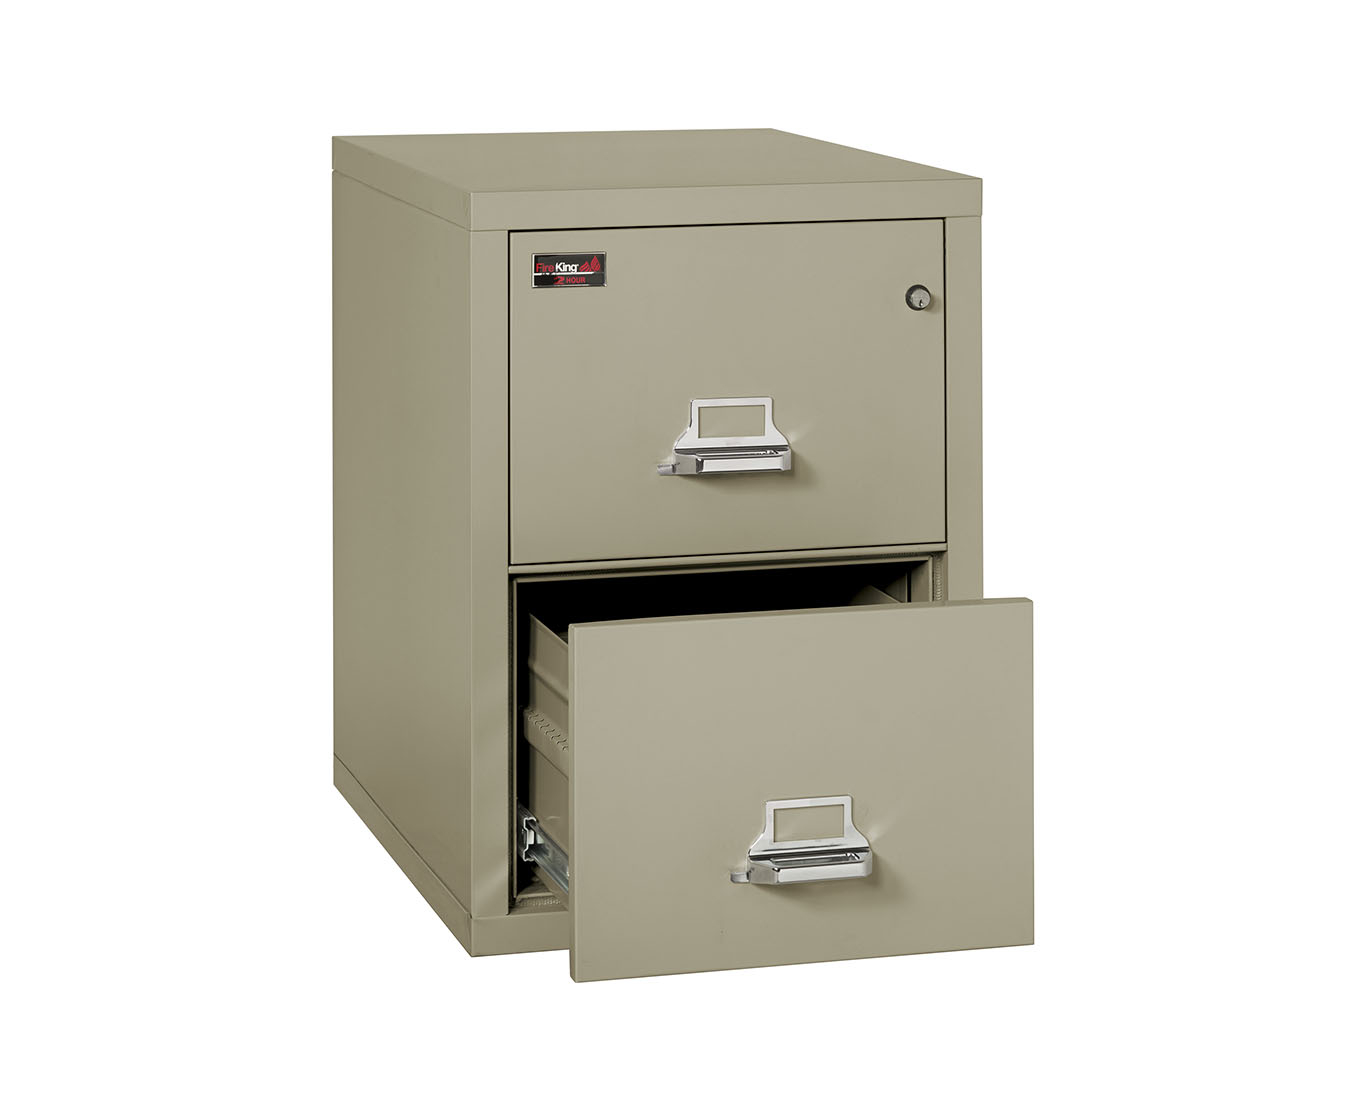 Fireproof File Cabinets 2 Hour Rated Fireking pertaining to measurements 1366 X 1110